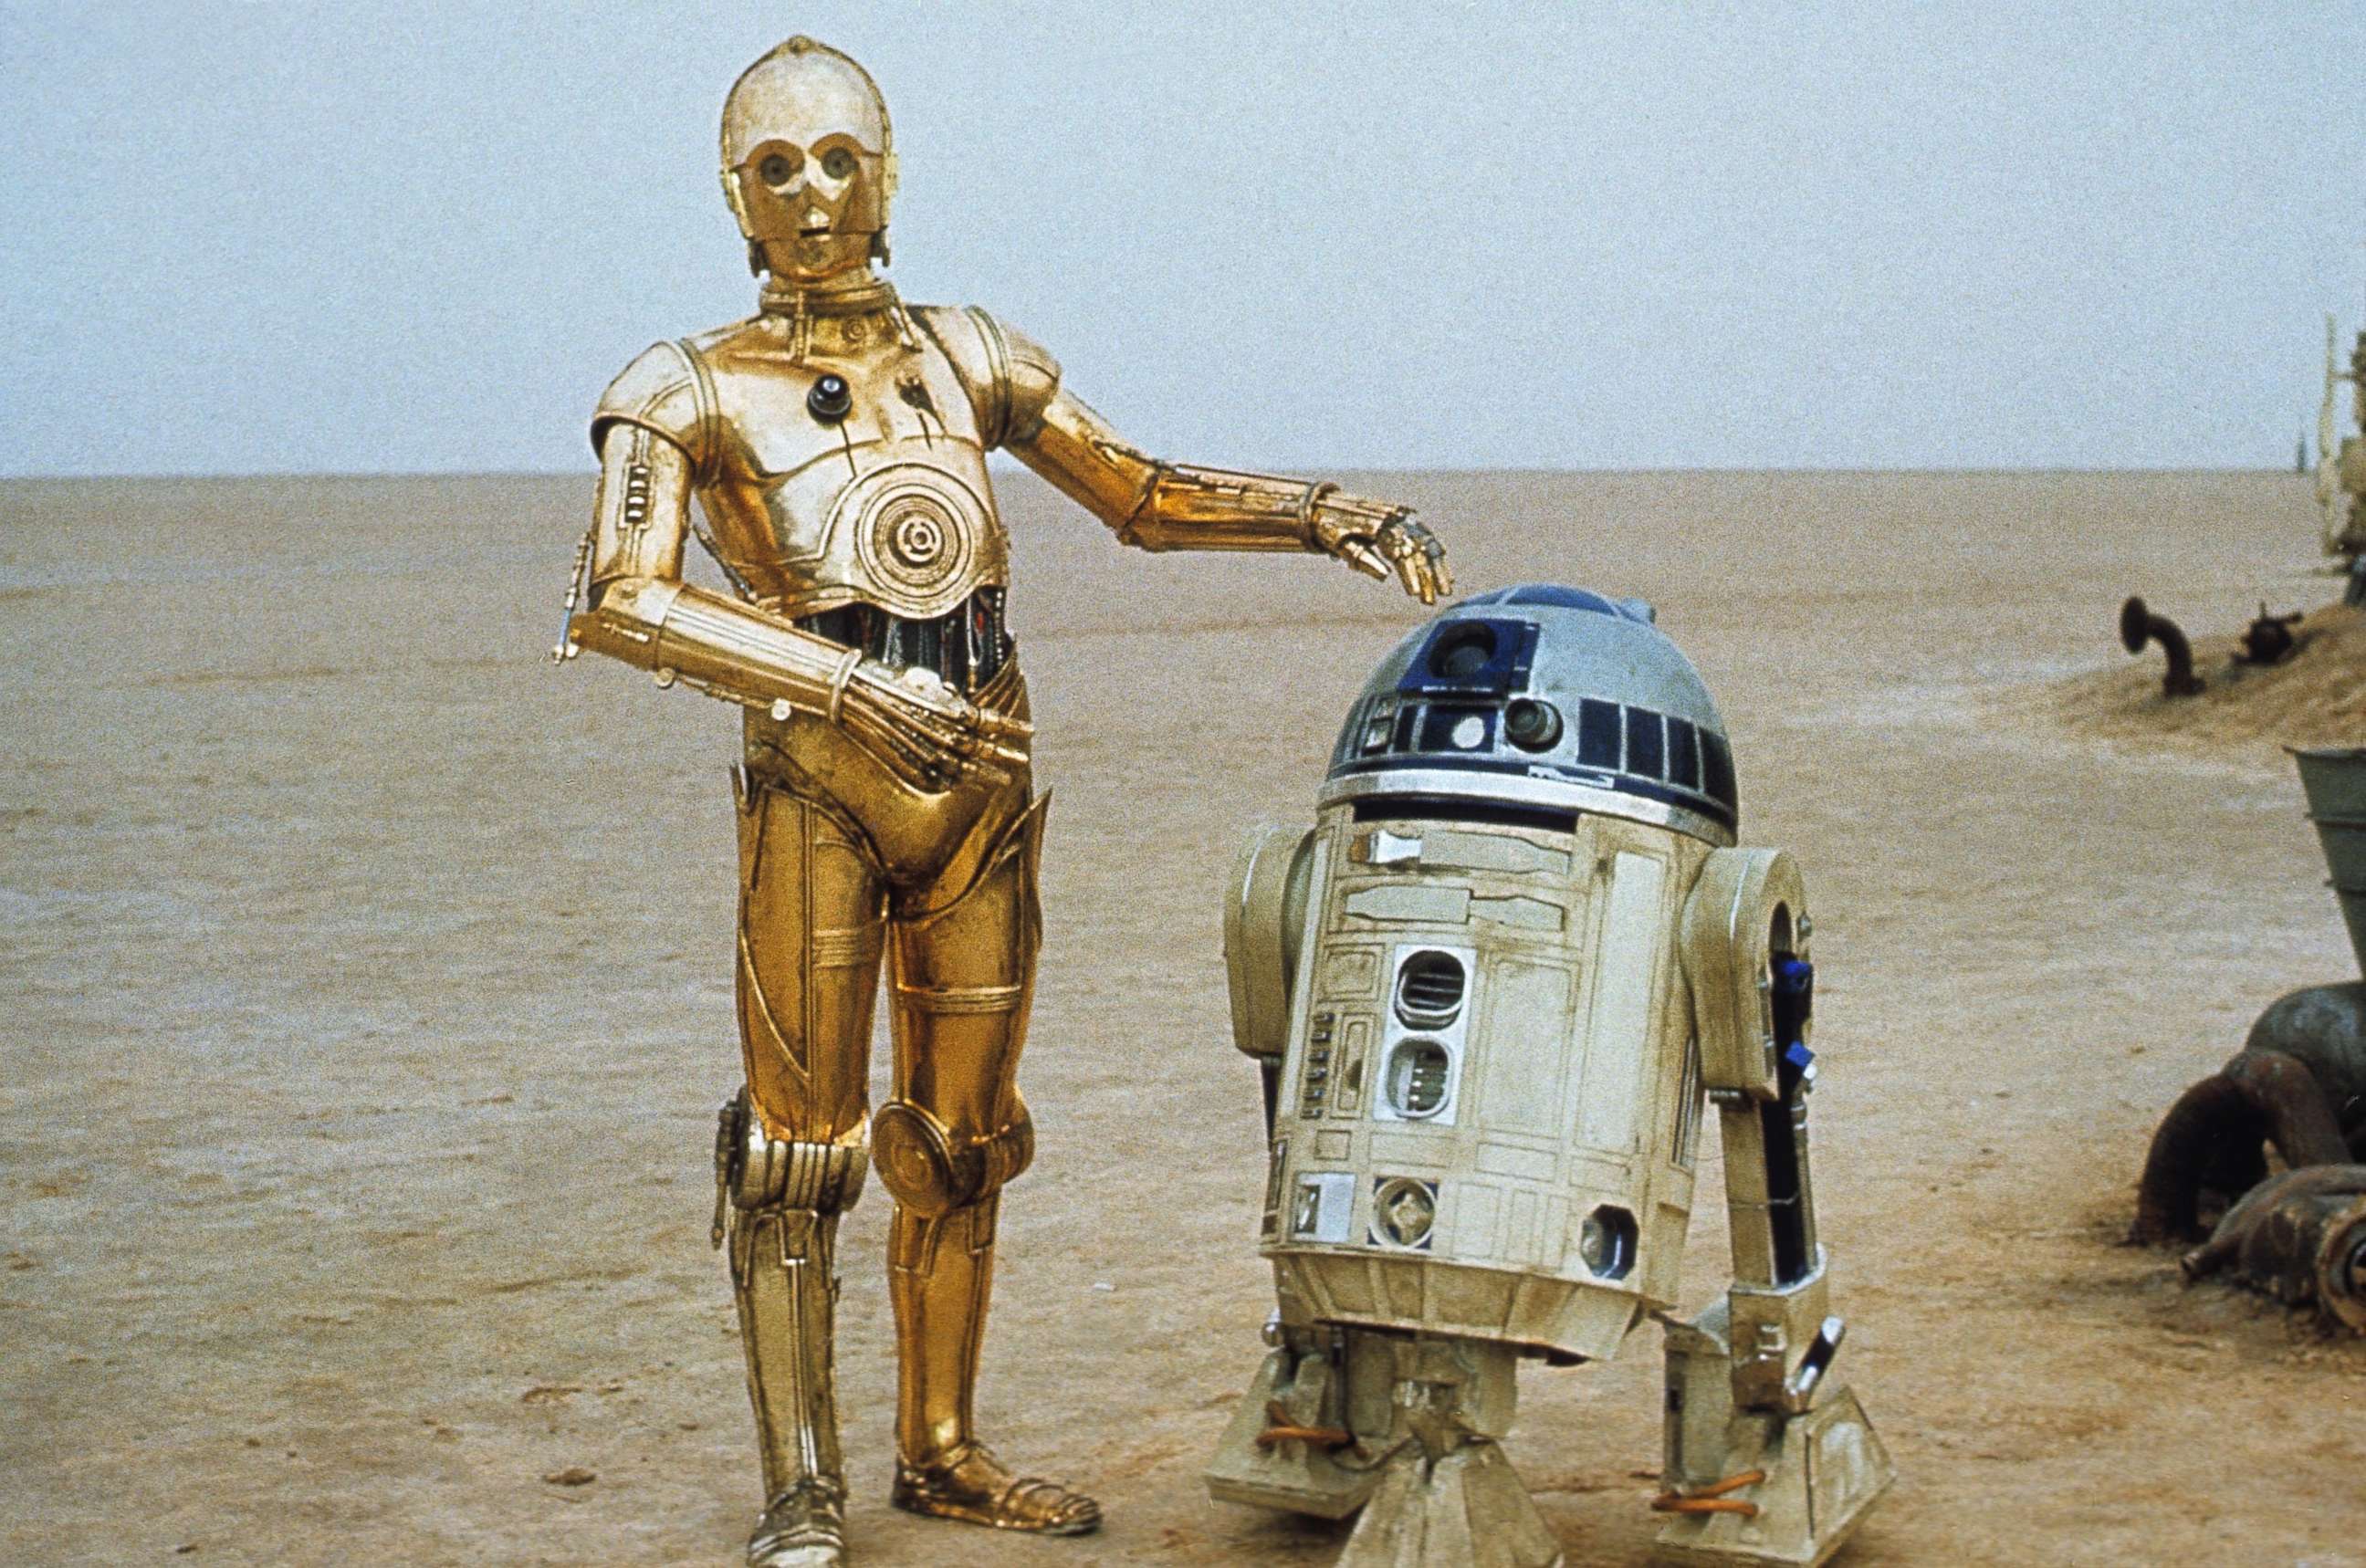 PHOTO: C-3P0, portrayed by Anthony Daniels, and R2-D2, portrayed by Kenny Baker, are seen in a scene from "Star Wars: Episode IV - A New Hope."